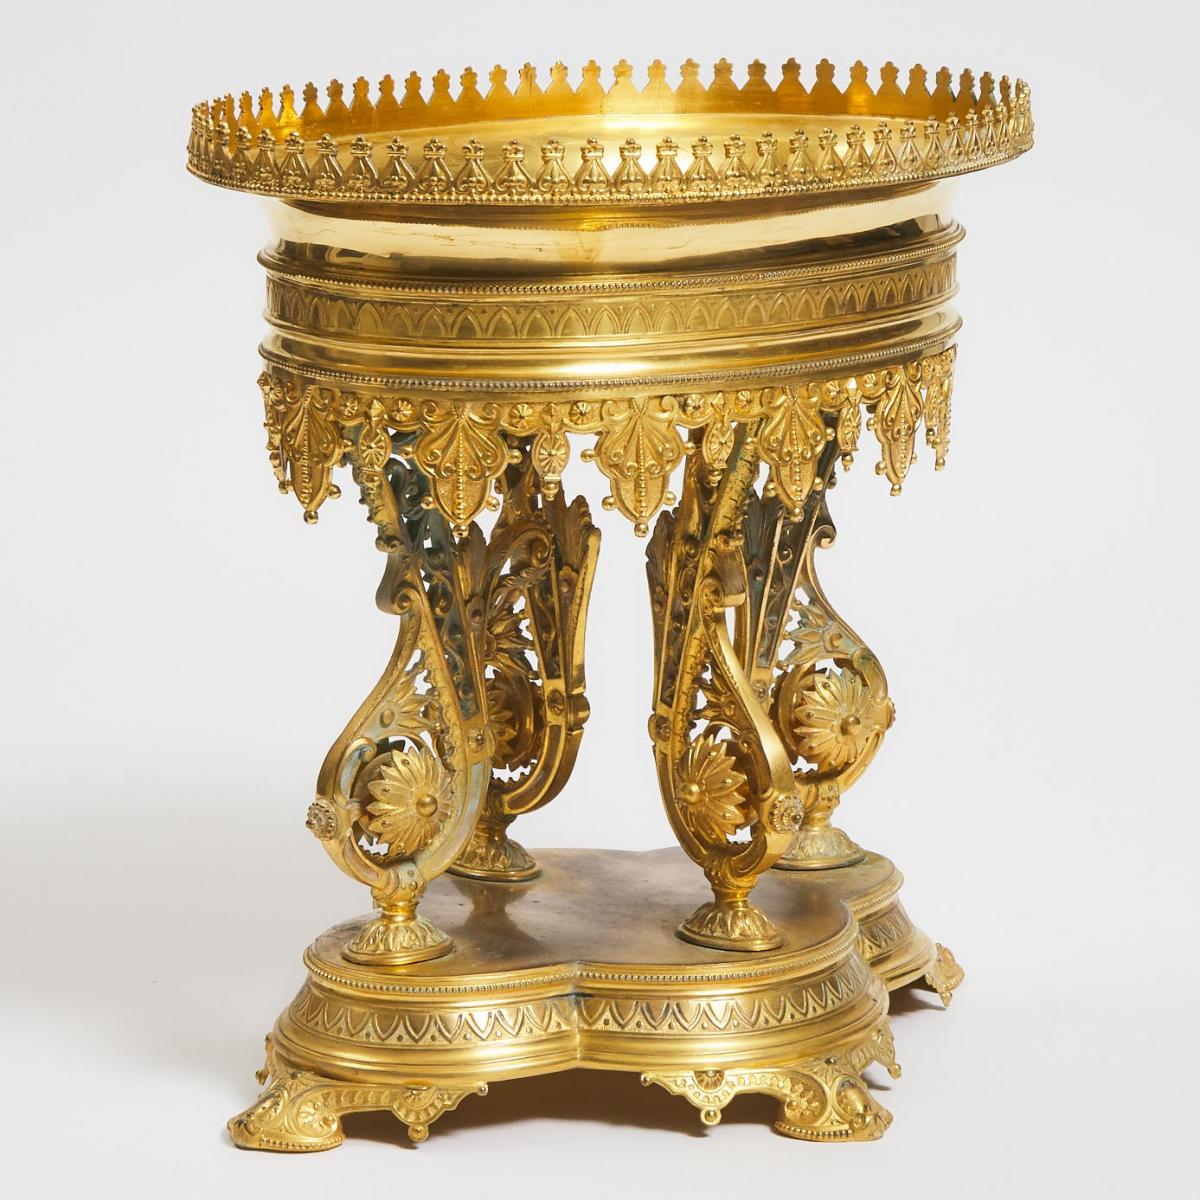 English Aesthetic Movement Gilt Bronze Oval Centrepiece Stand, c.1870, 13.25 x 12.5 x 9 in — 33.7 x - Image 2 of 2